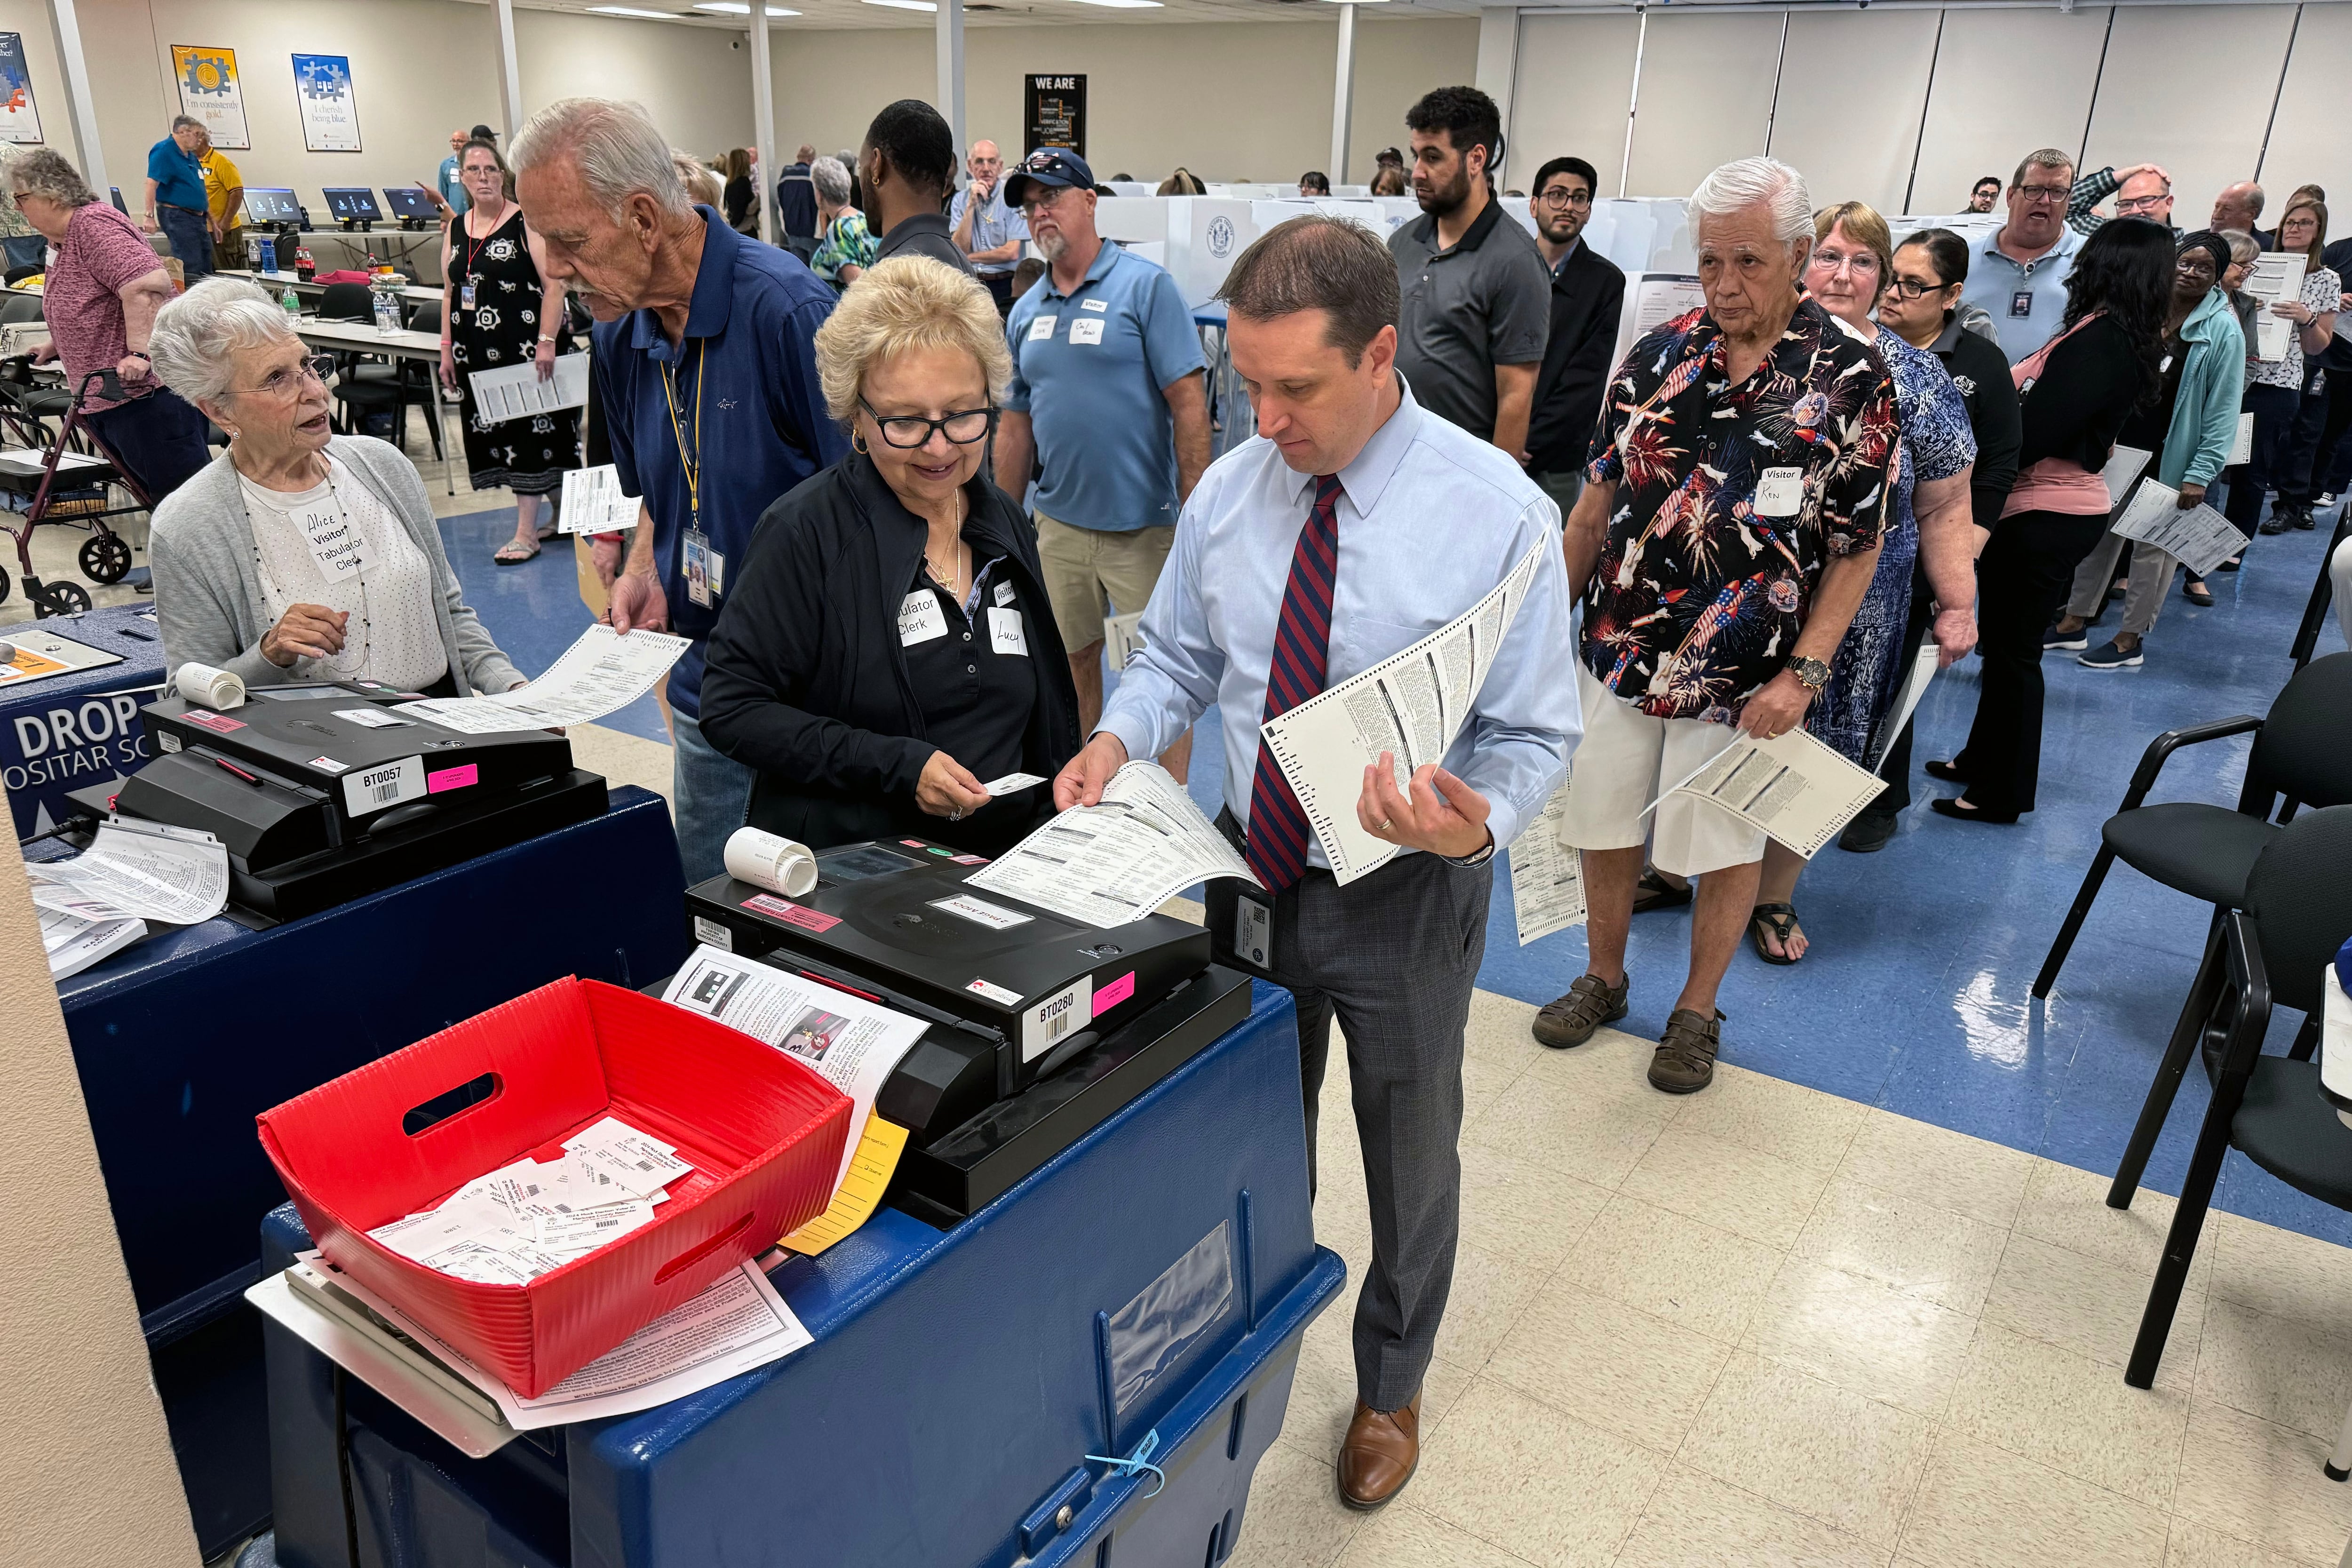 Two people work at a voting machine while a large group of people in the background in a room.